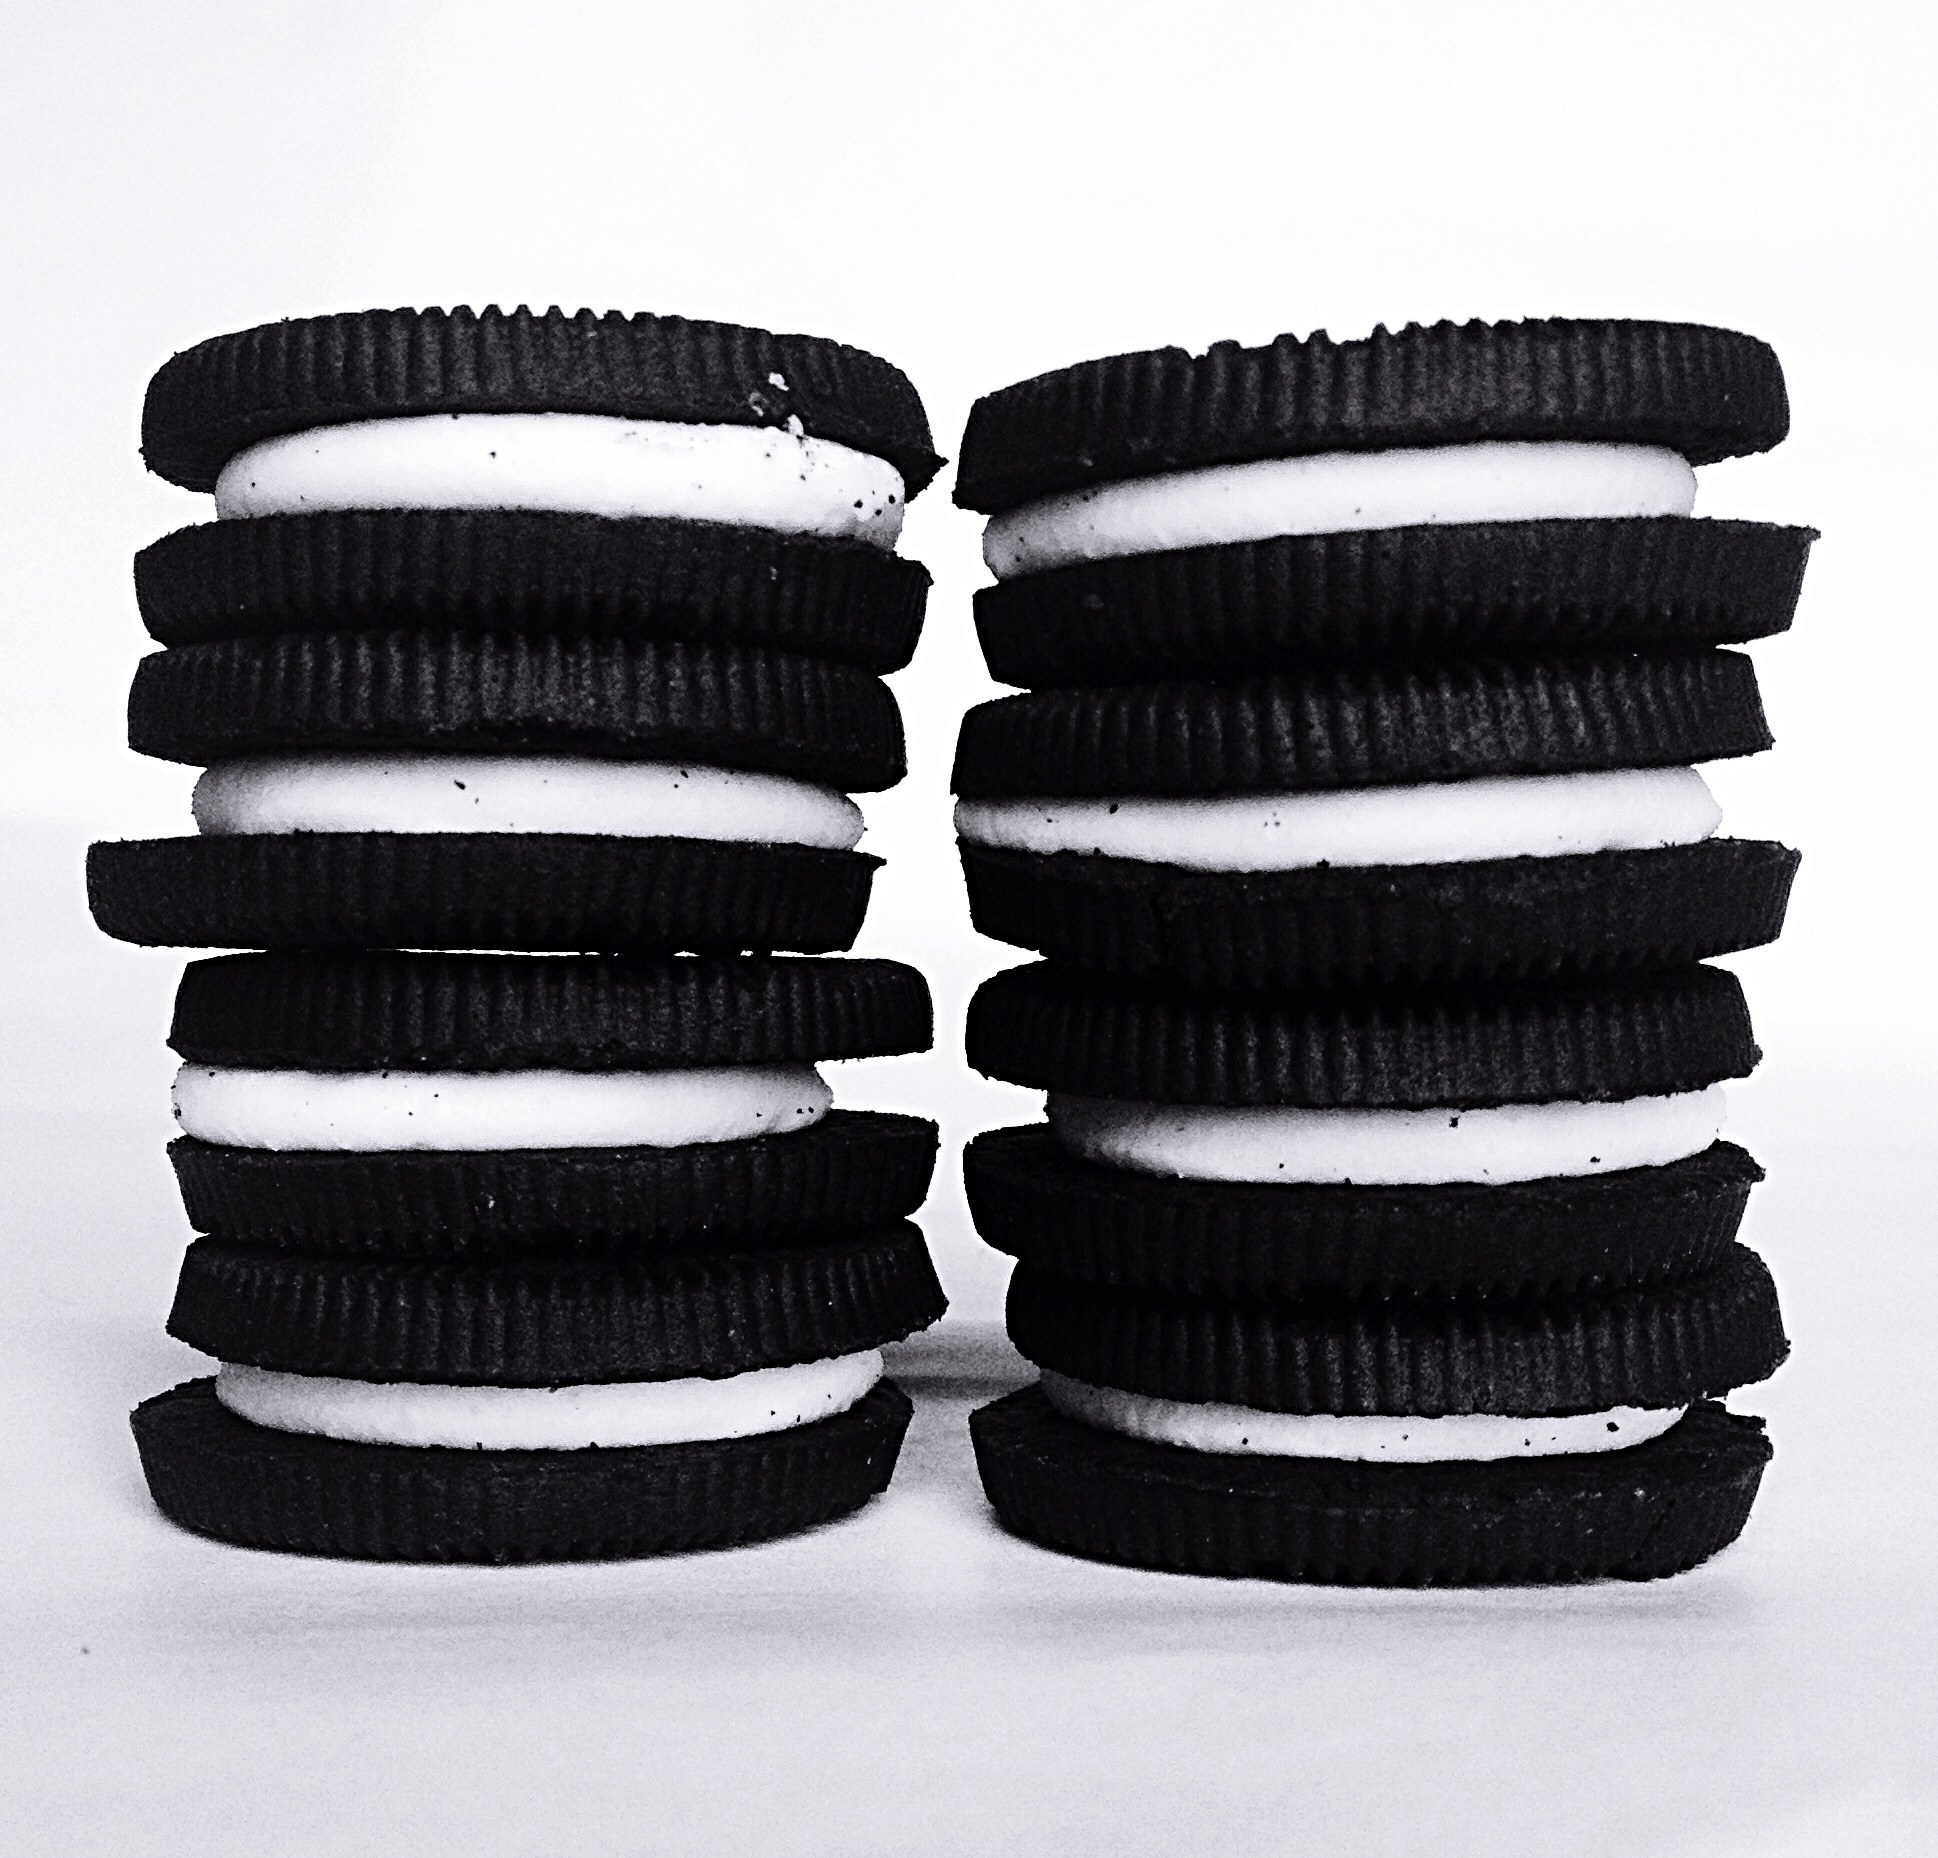 A stack of Oreo cookies.